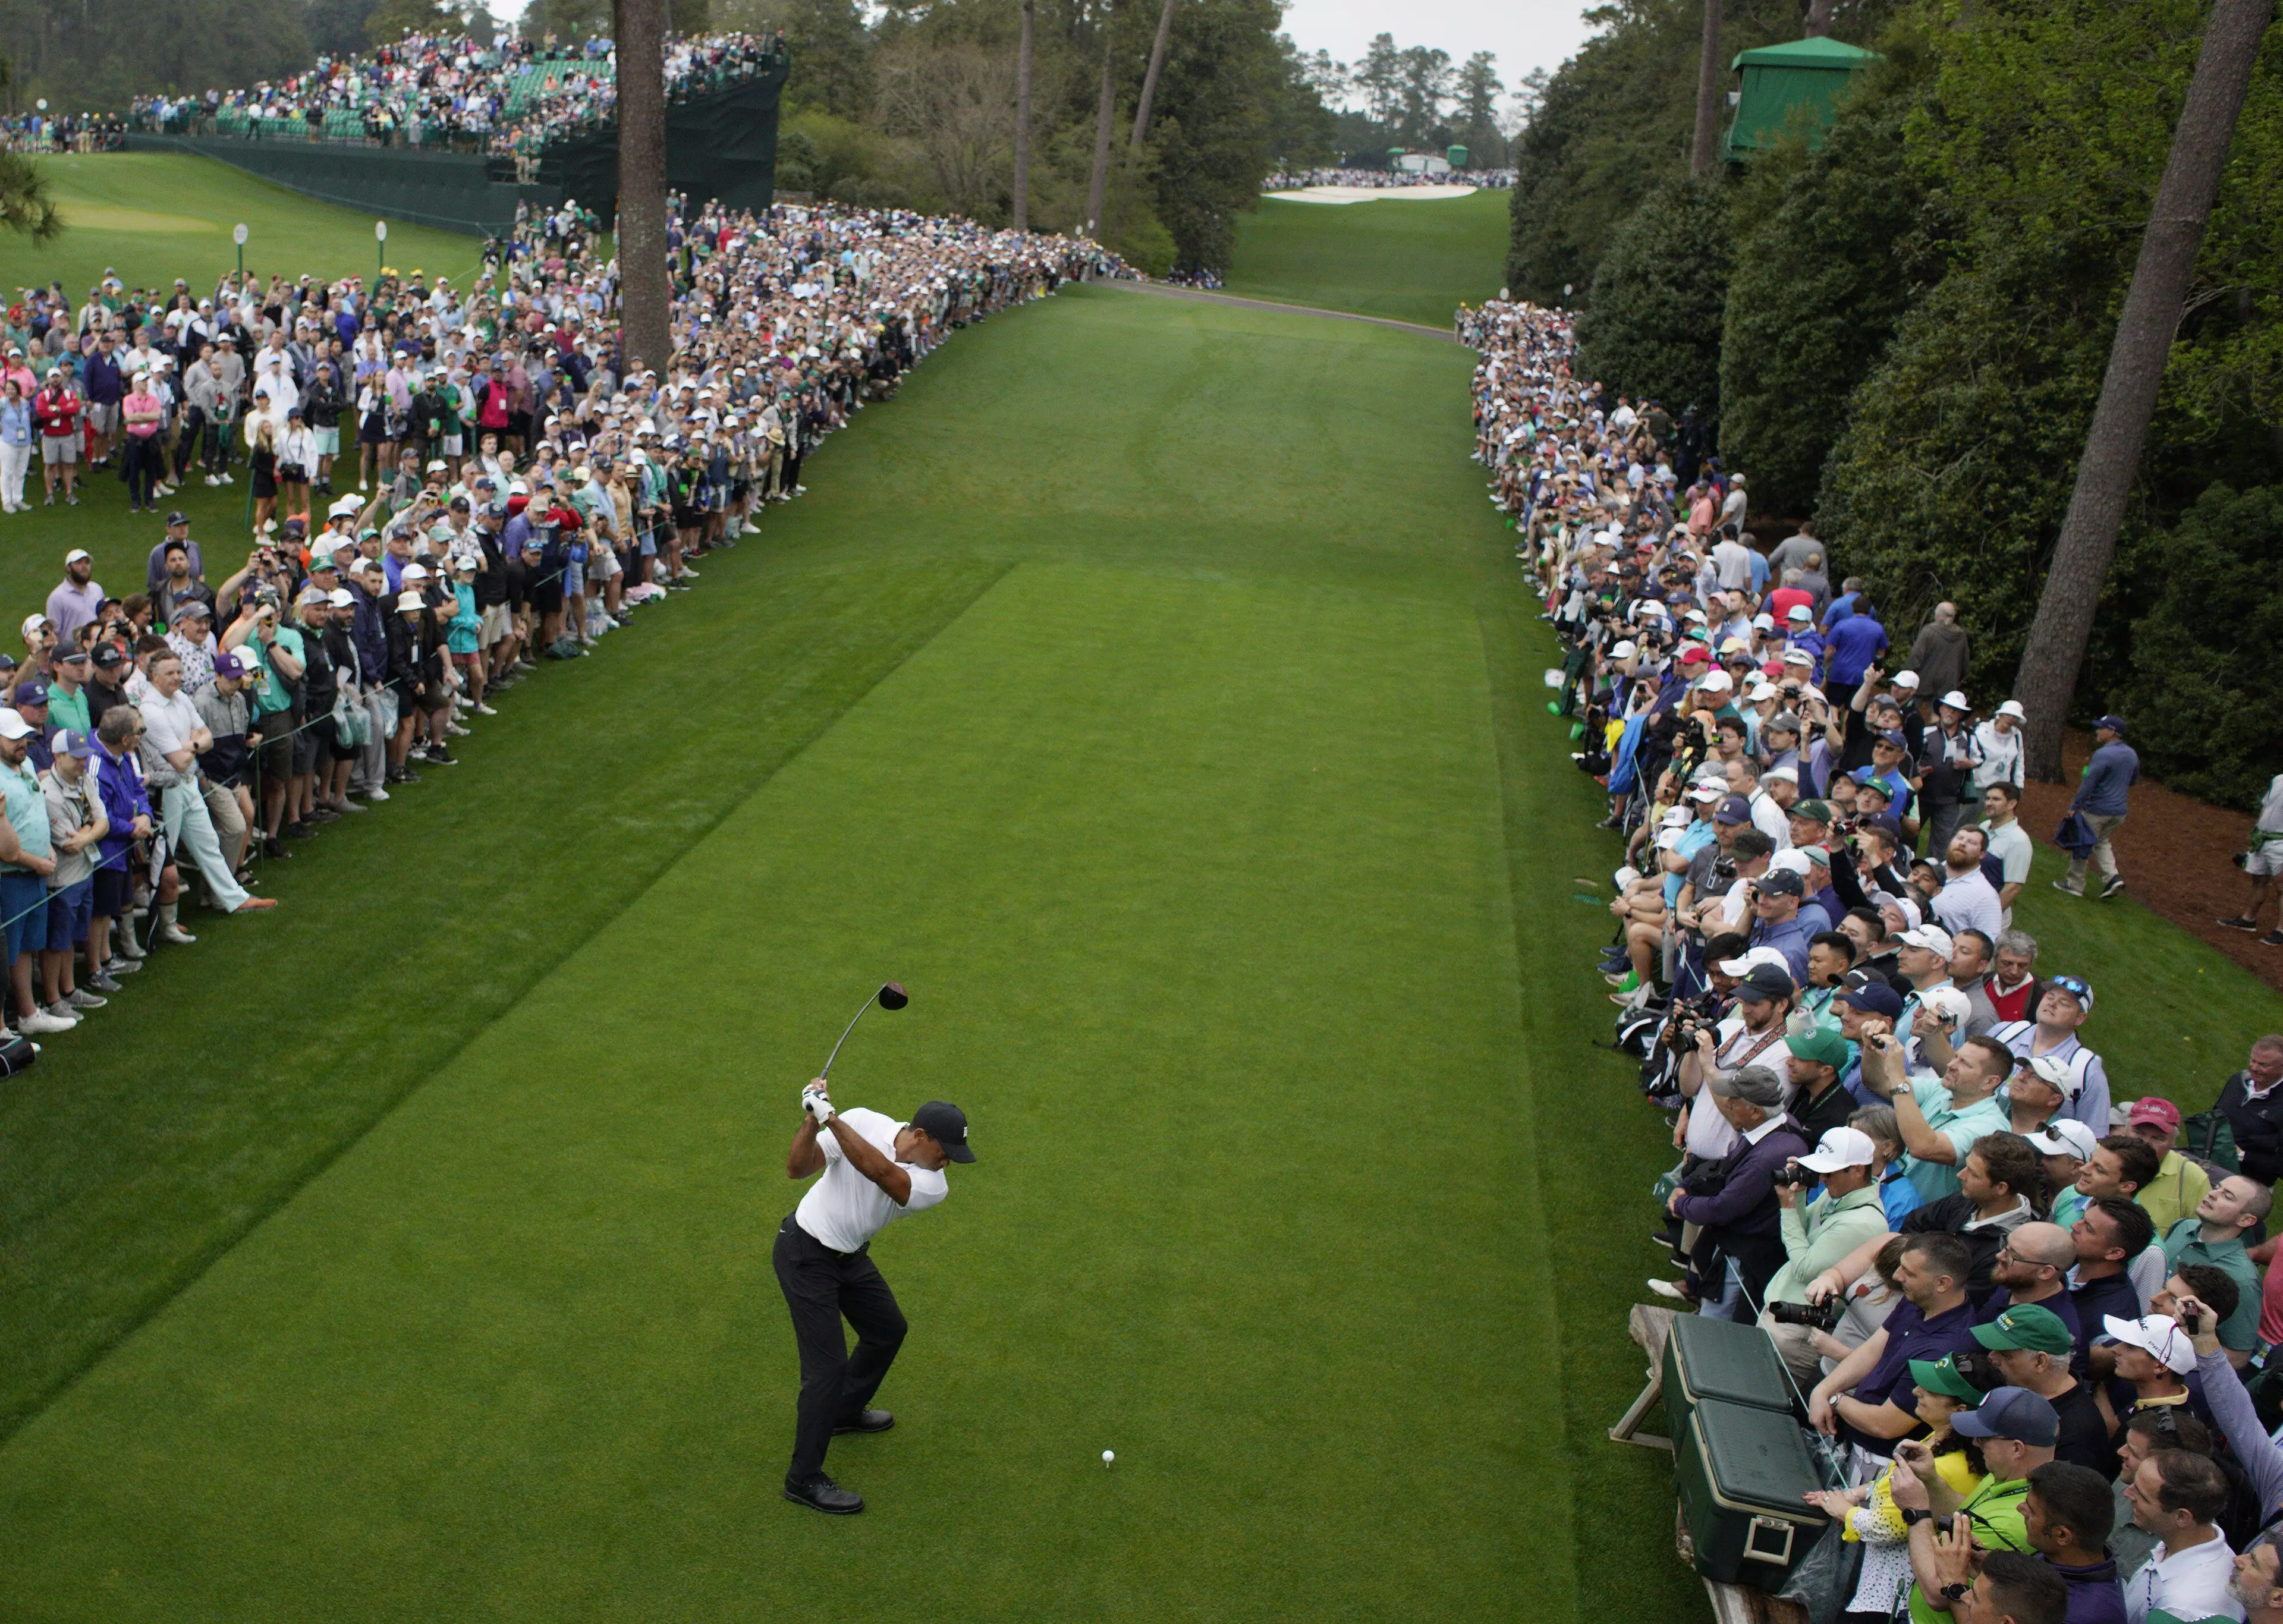 The fan turnout to see Tiger Woods' practise round. Credit; Alamy